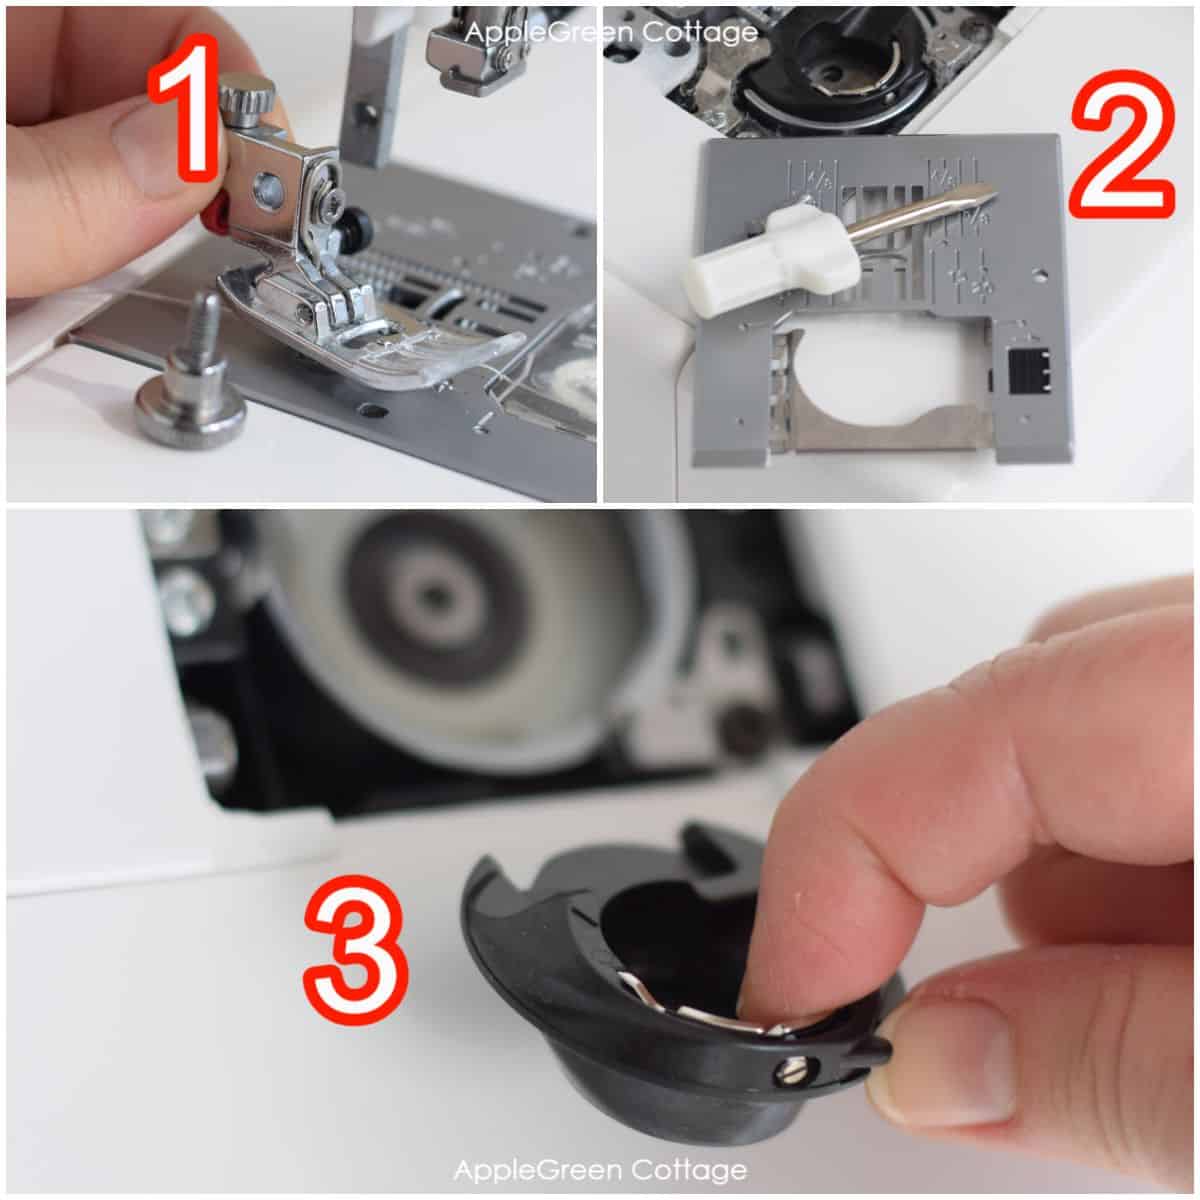 steps showing how to open the machine base plate and expose the bobbin area